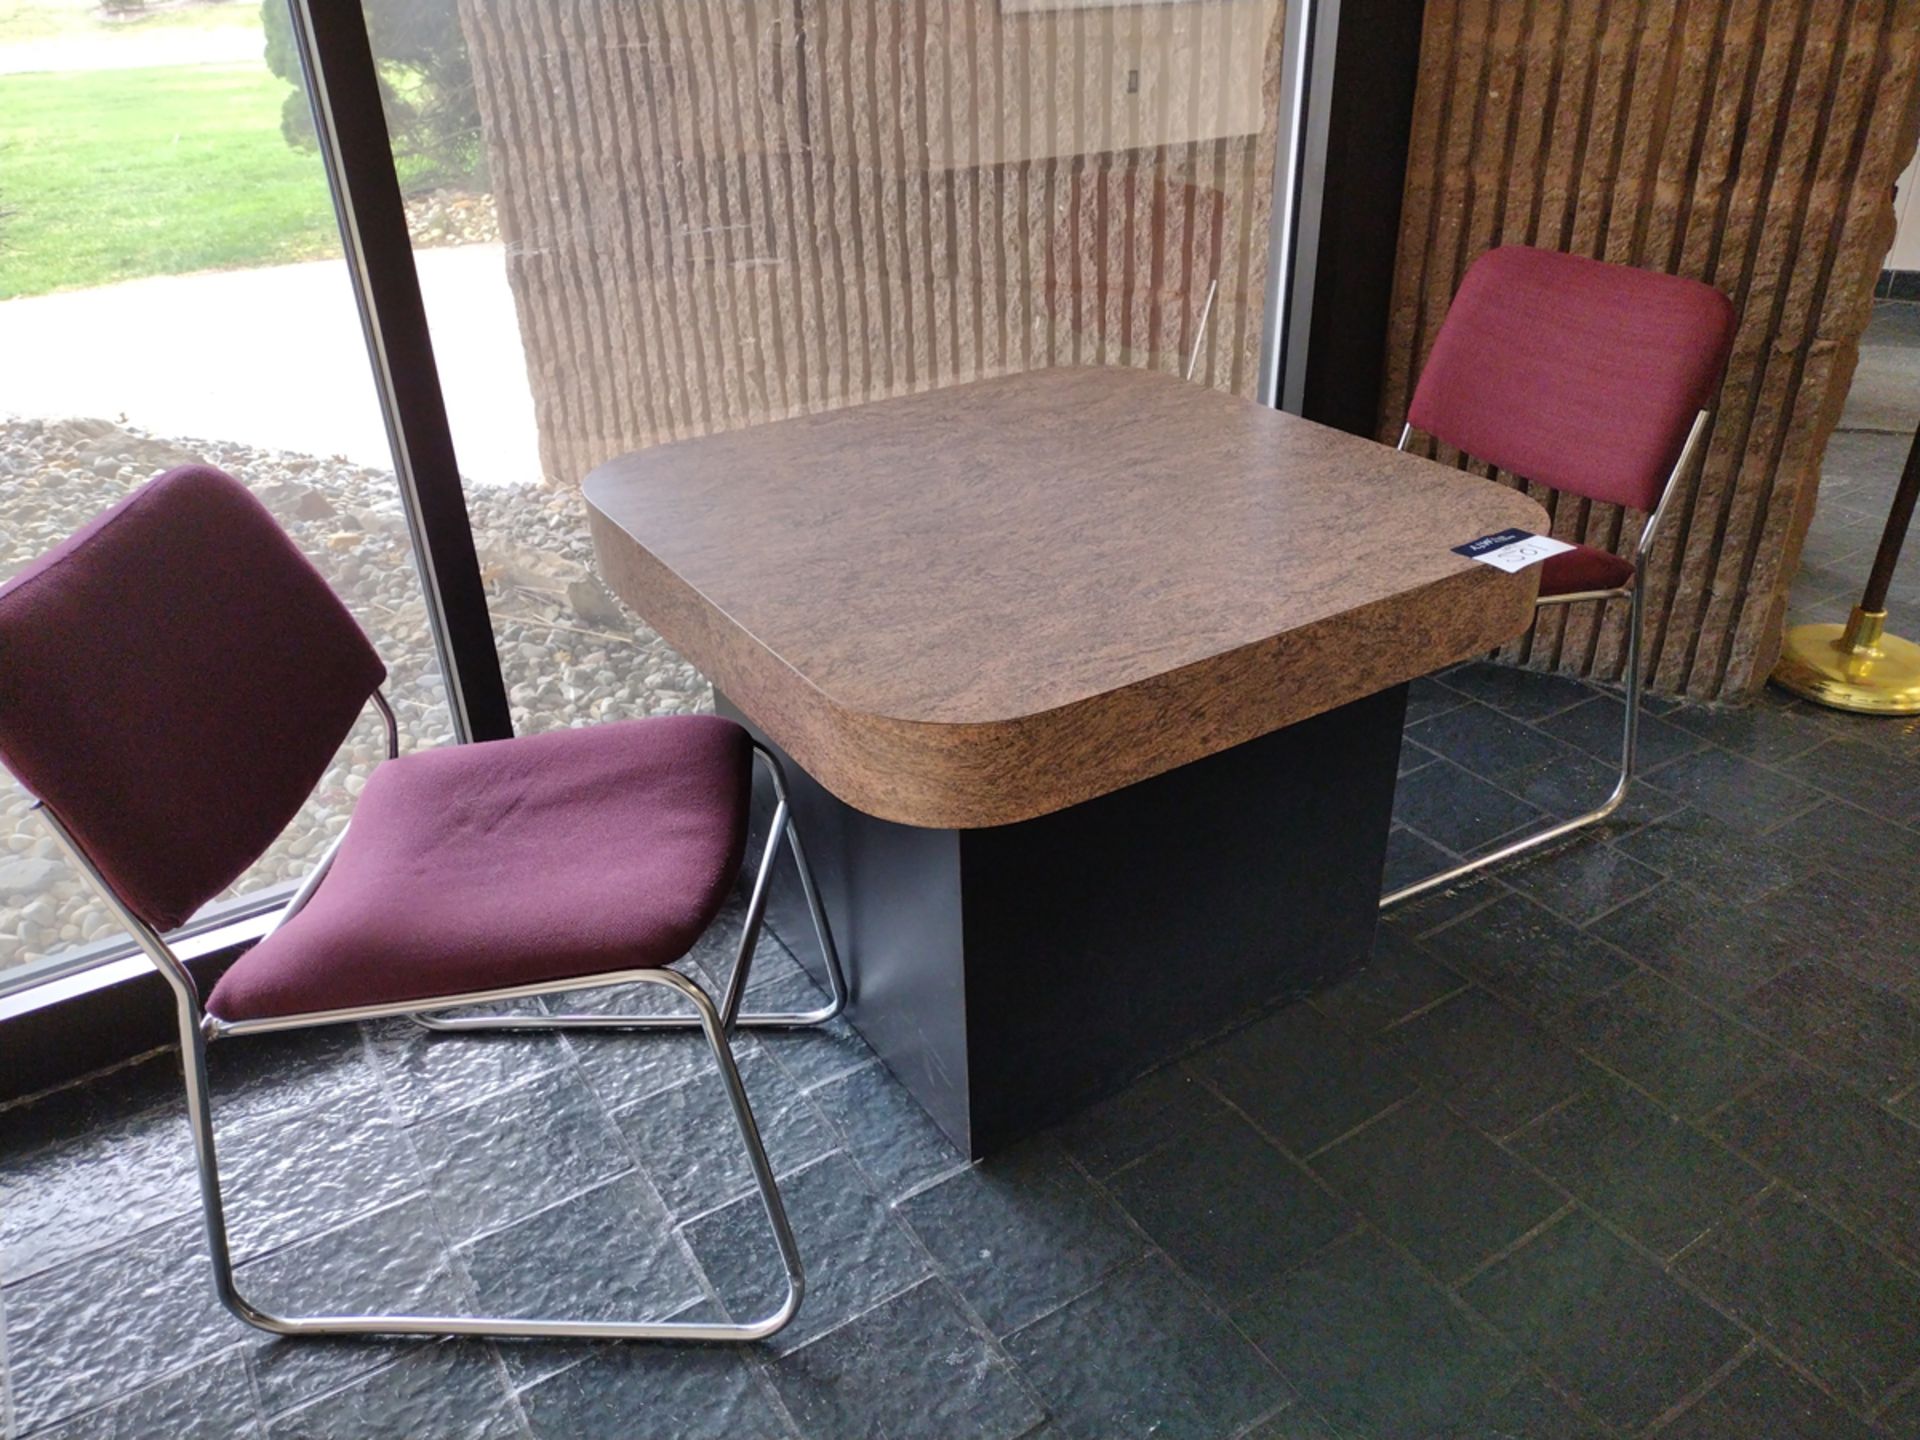 Group of Furniture Throughout Lobby Area - Image 5 of 5